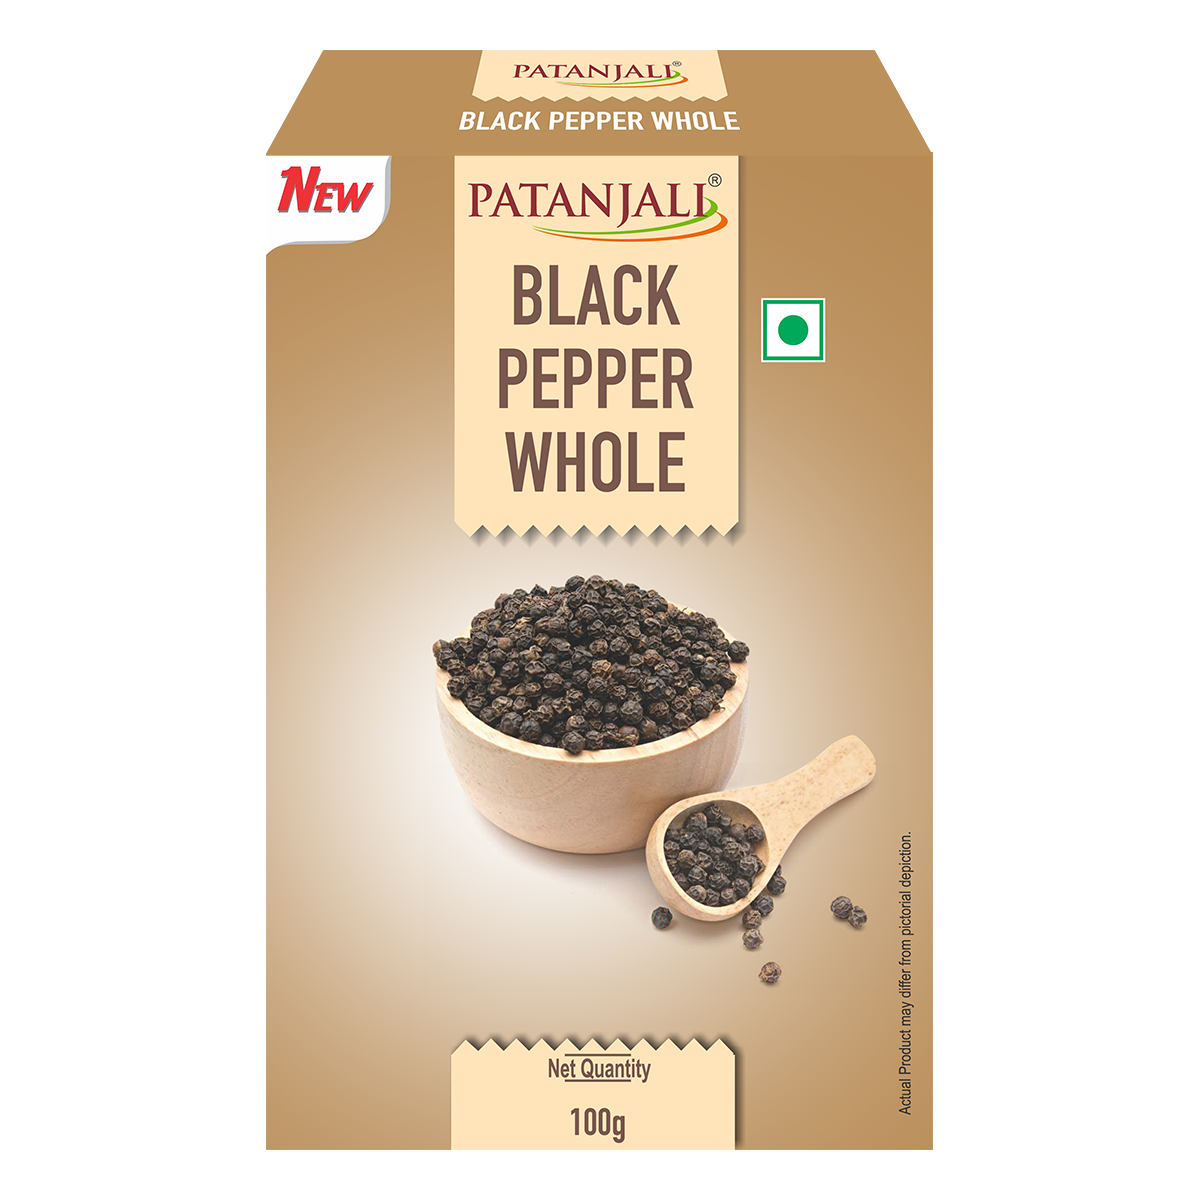 1690958001BlackPepperWHOLE-100g1.png